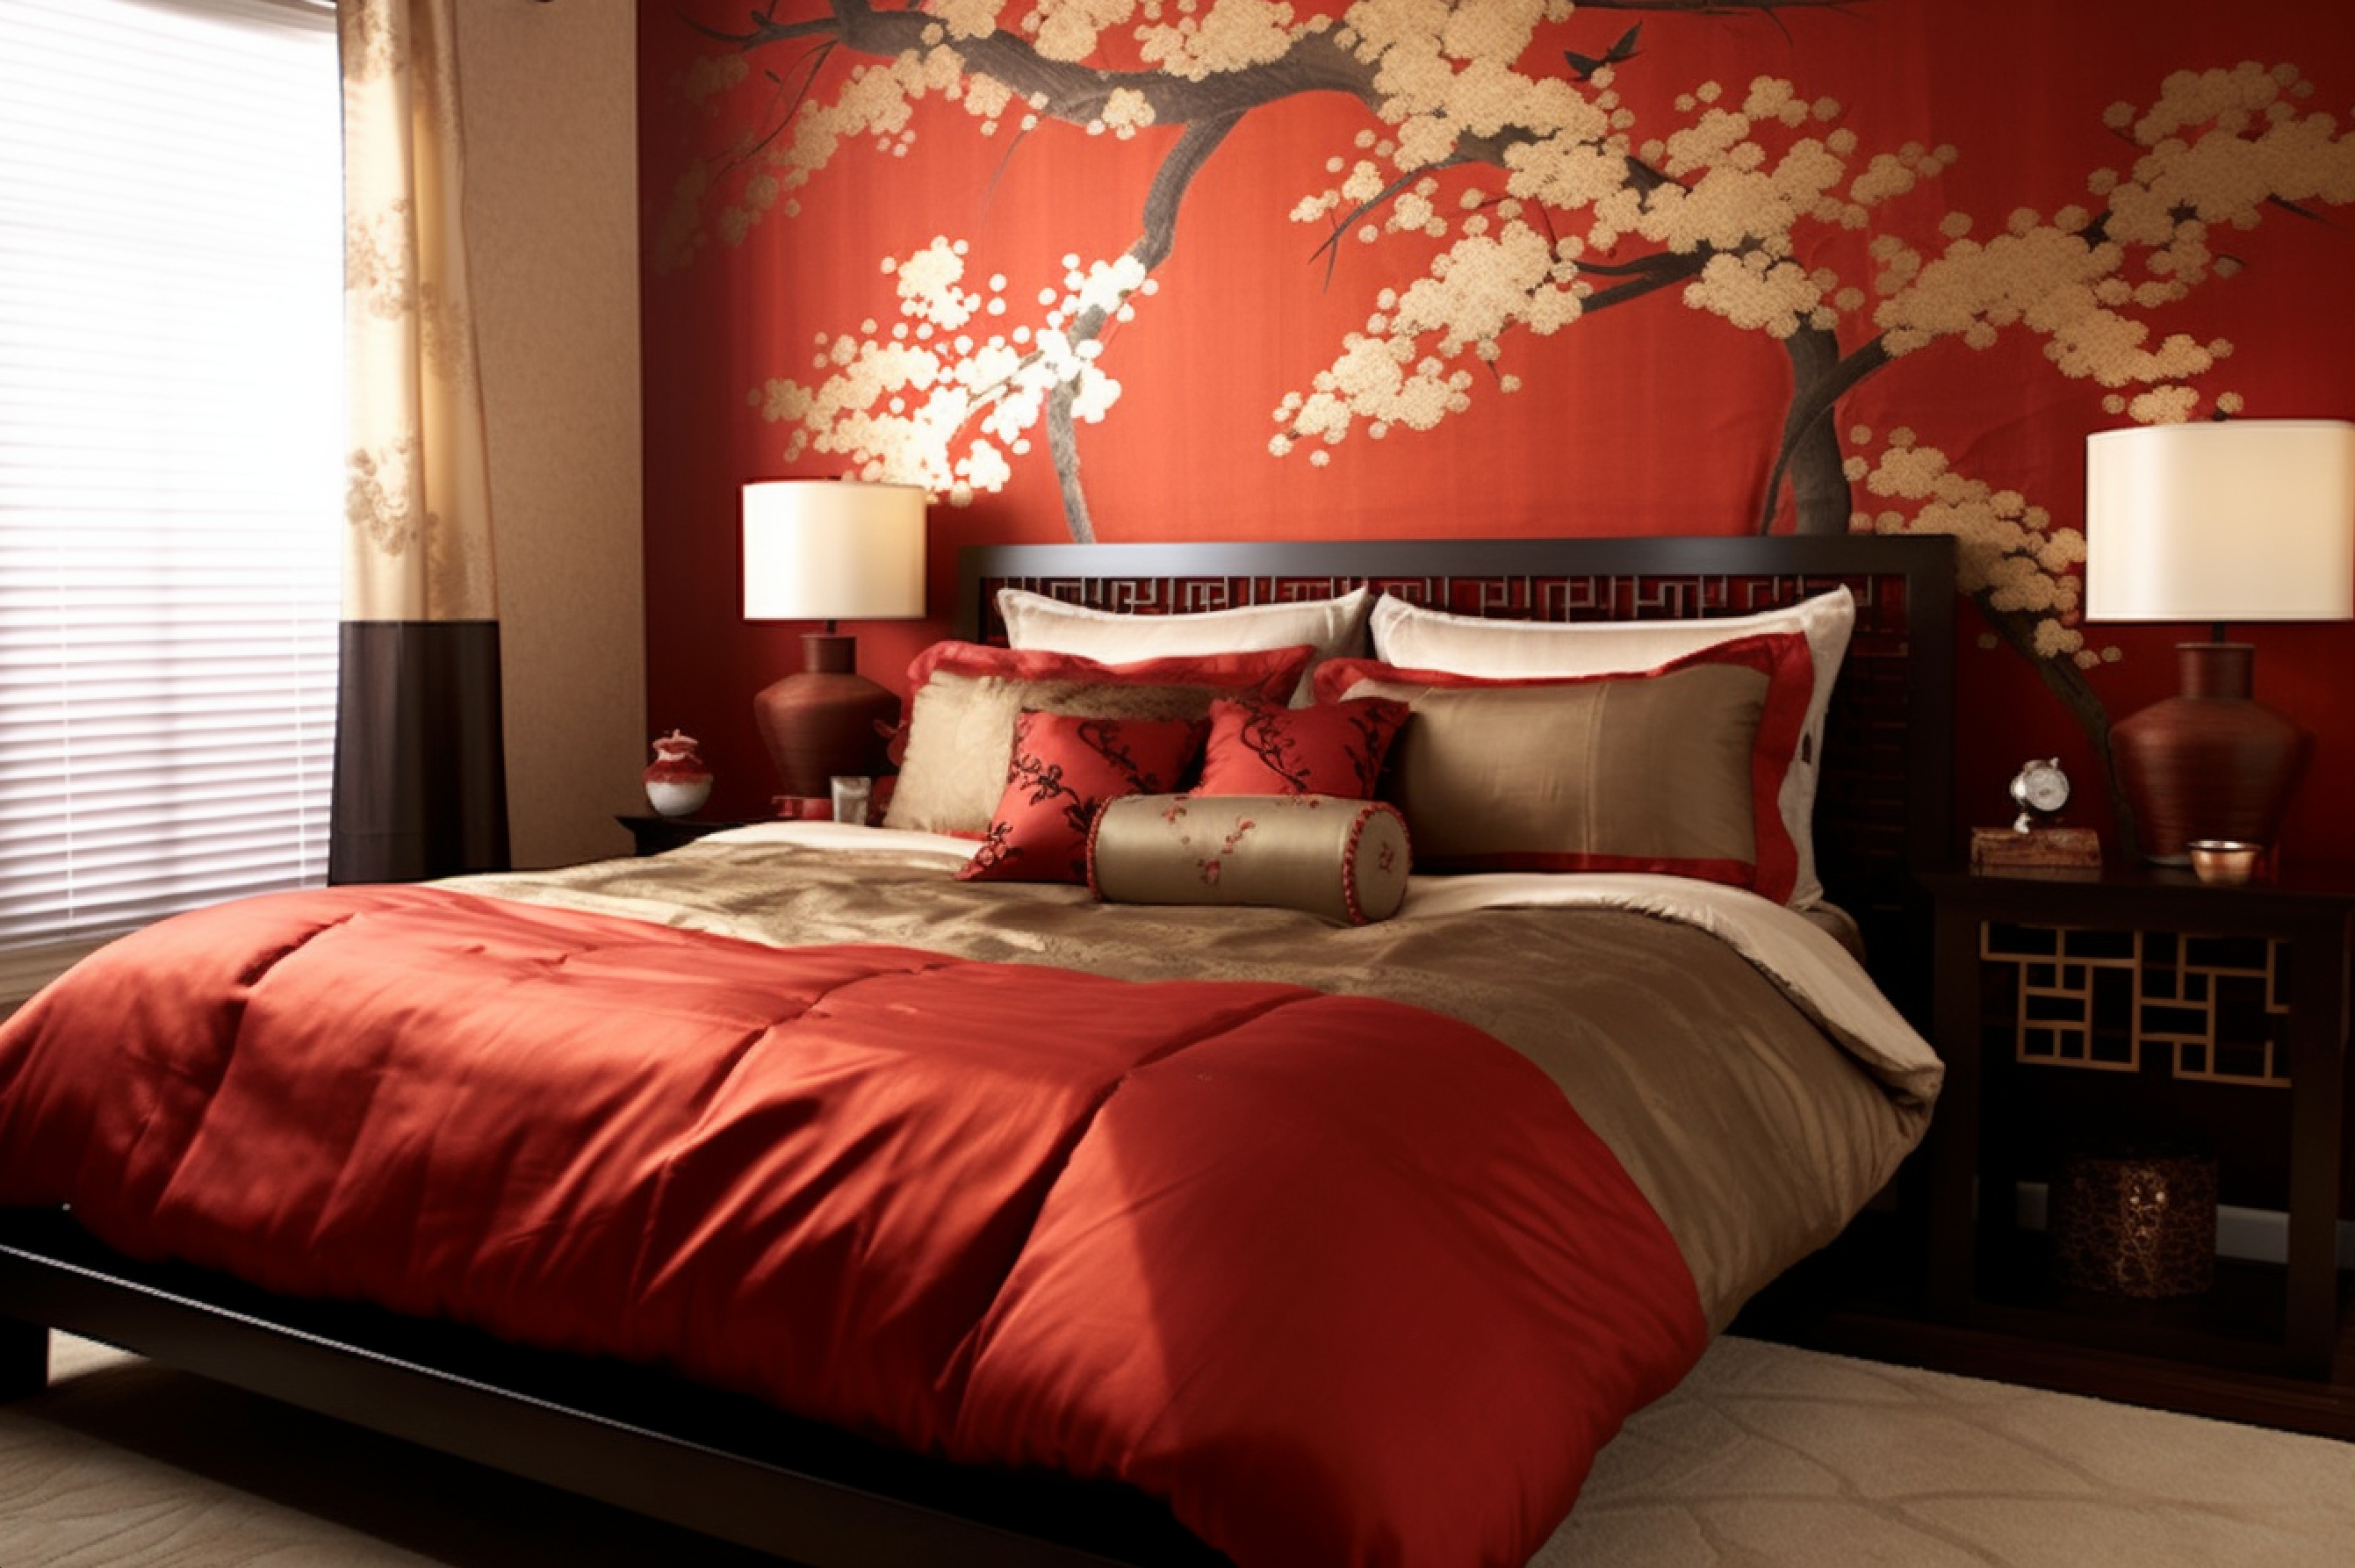 6. Red and Gold Color Scheme - Asian-inspired Bedroom